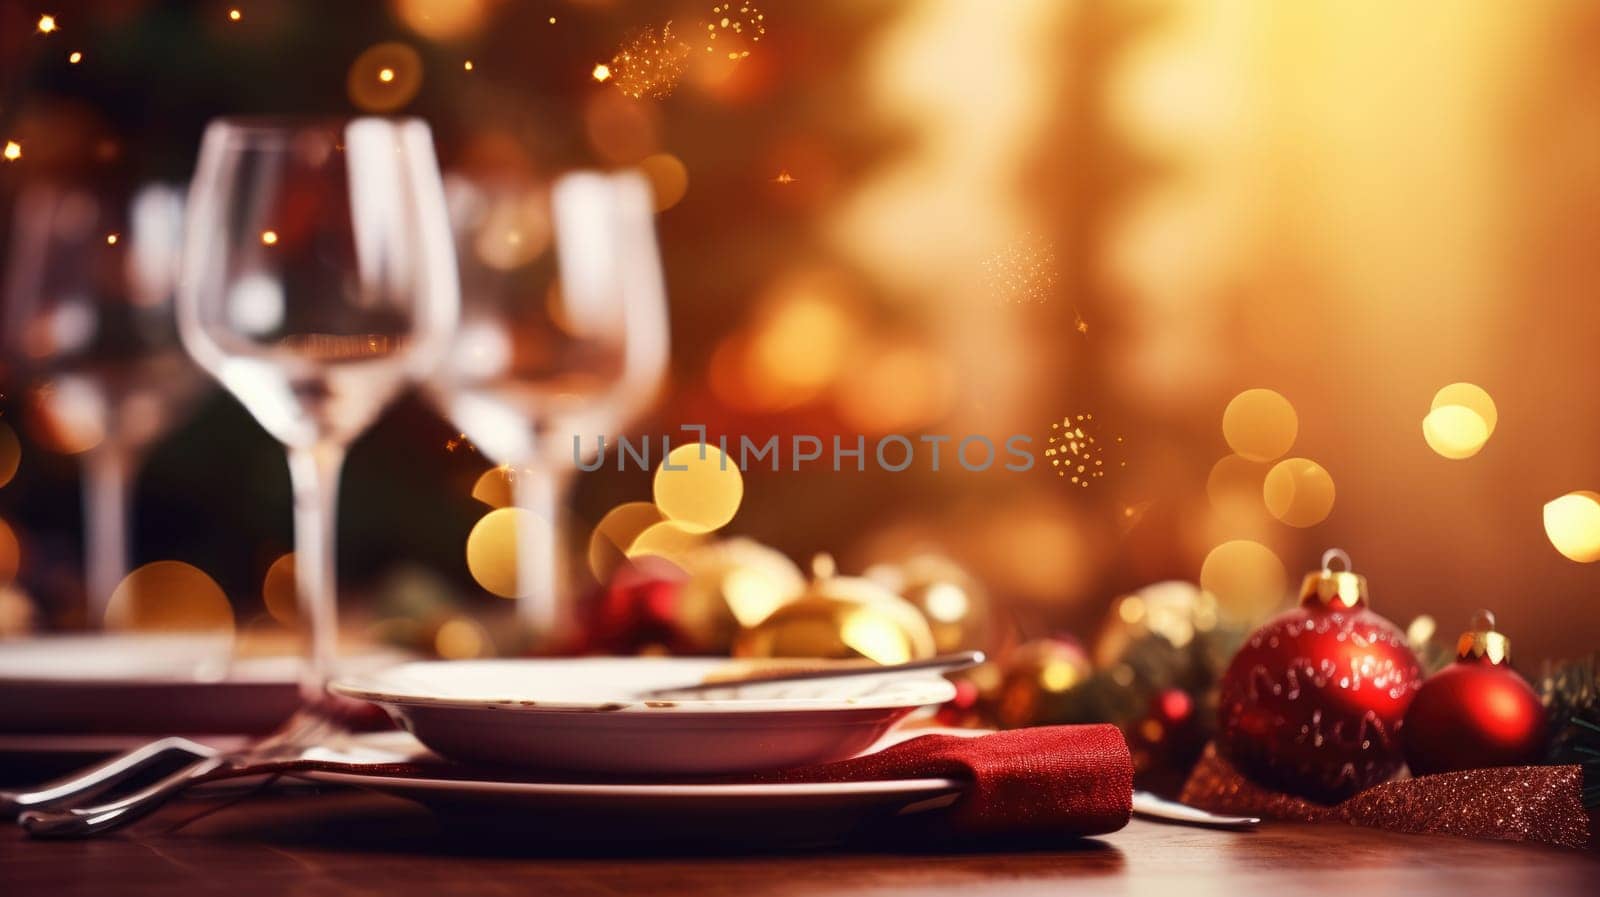 Blurred lights and table served for christmas dinner party at home by natali_brill